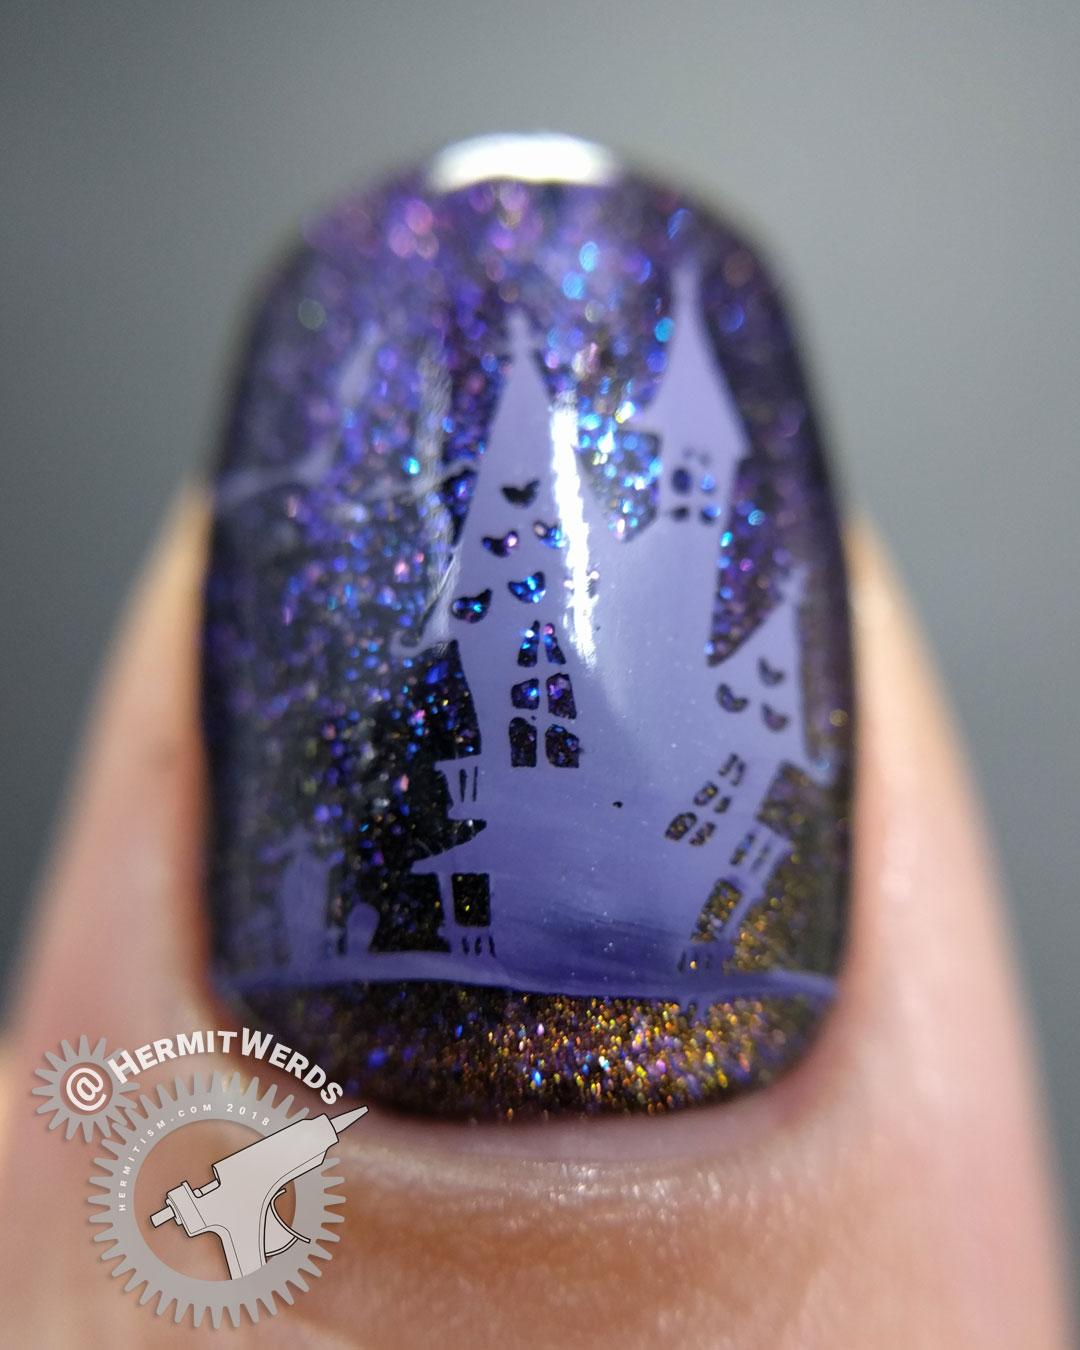 Thankfully Halloween - Hermit Werds - purple magnetic polish with spooky stamping (spider, ghouls, bats, haunted house) on top